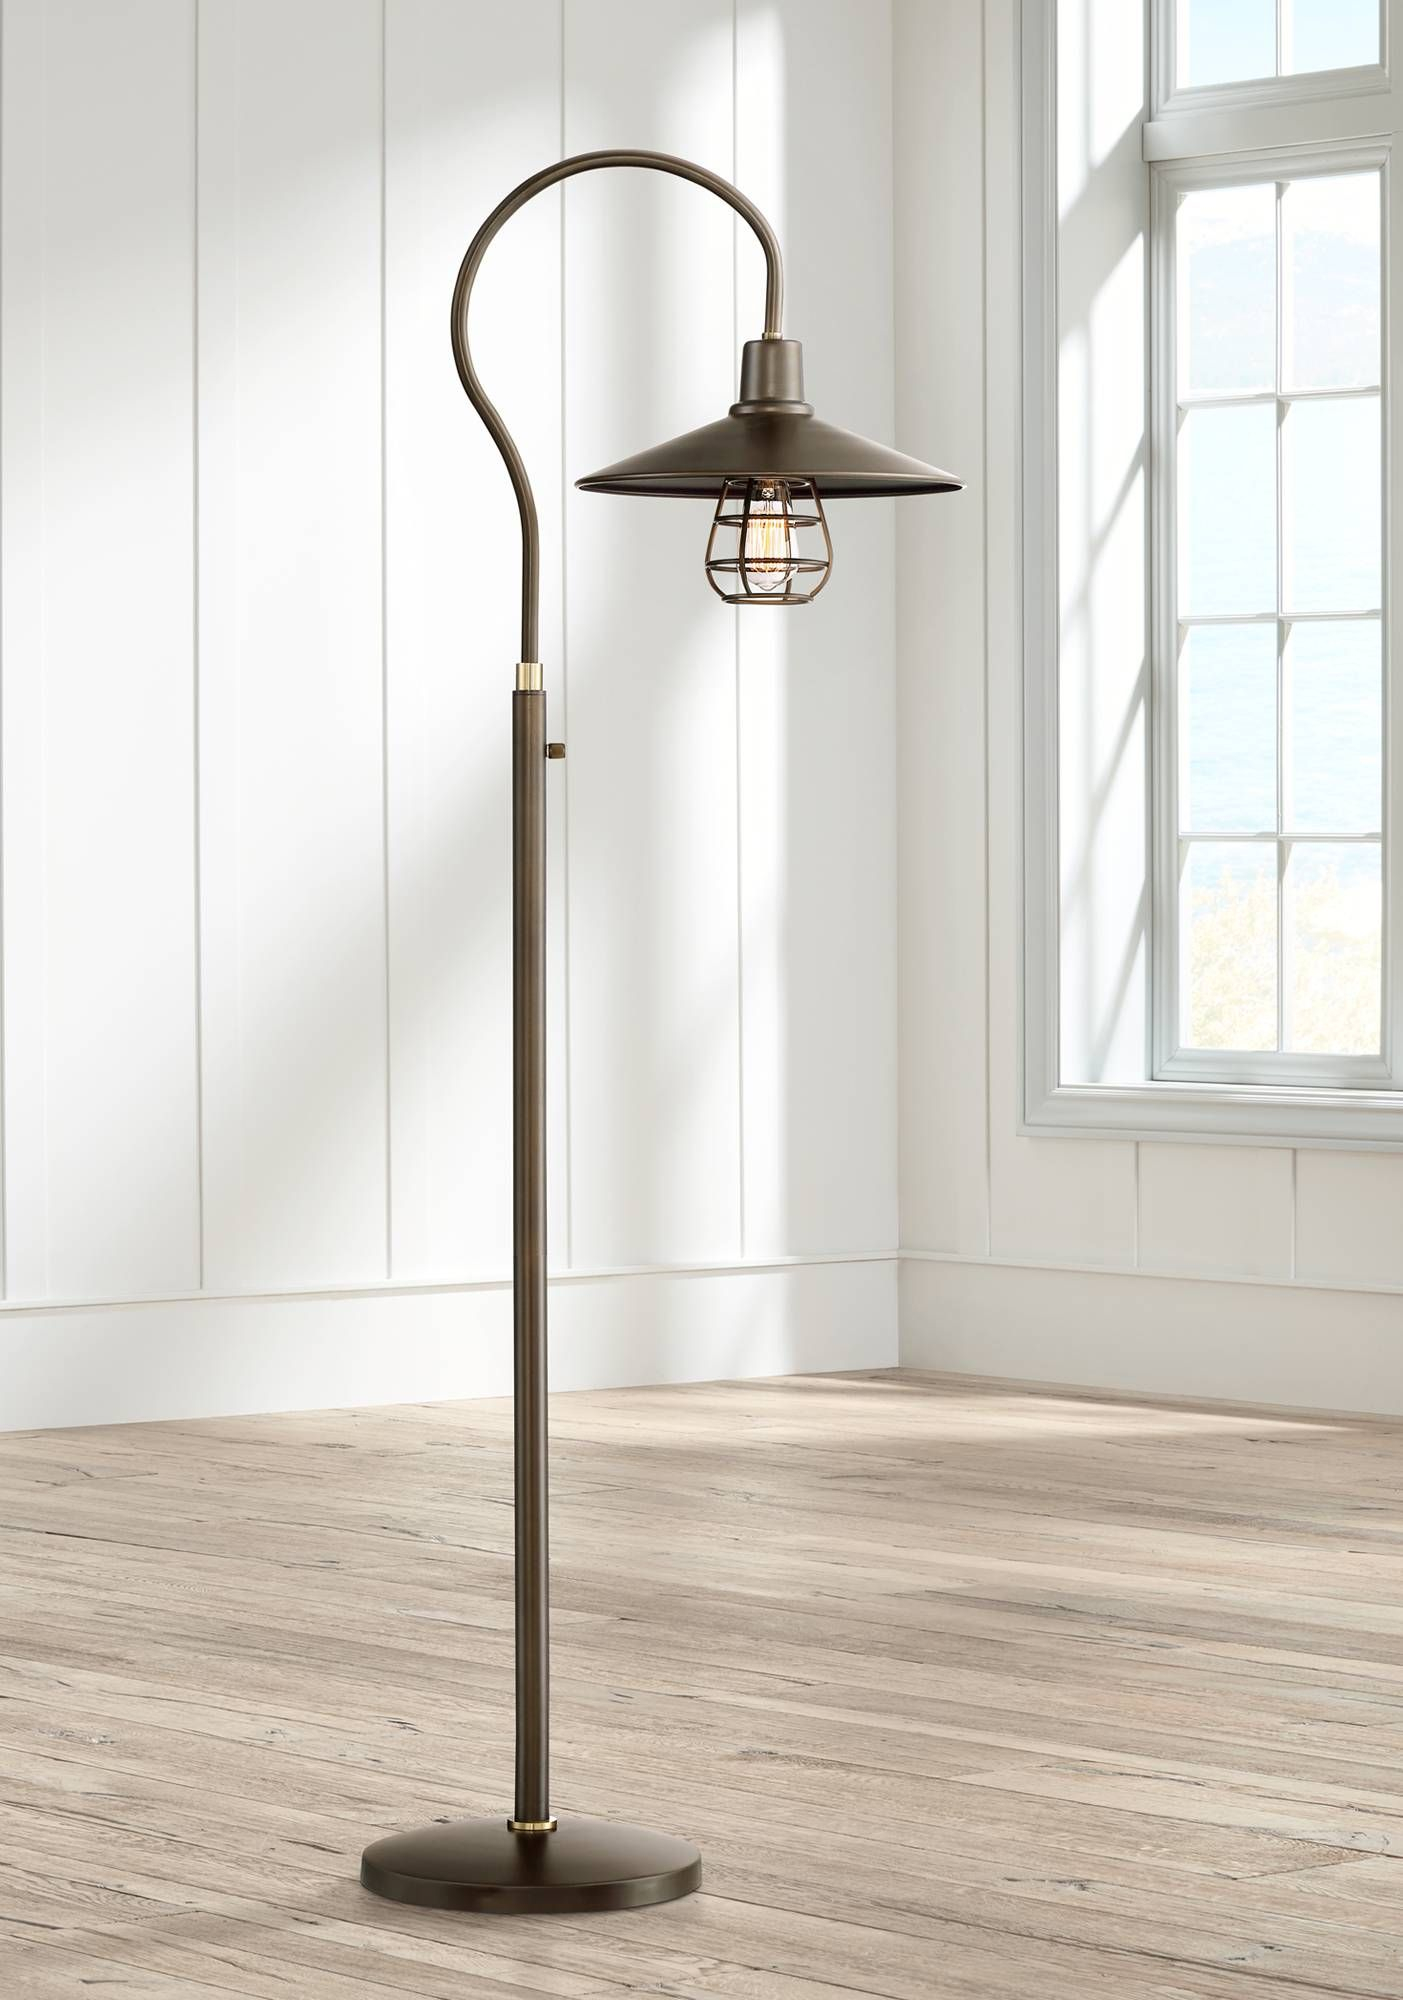 Garryton Industrial Oil Rubbed Bronze Floor Lamp 9m658 within dimensions 1403 X 2000